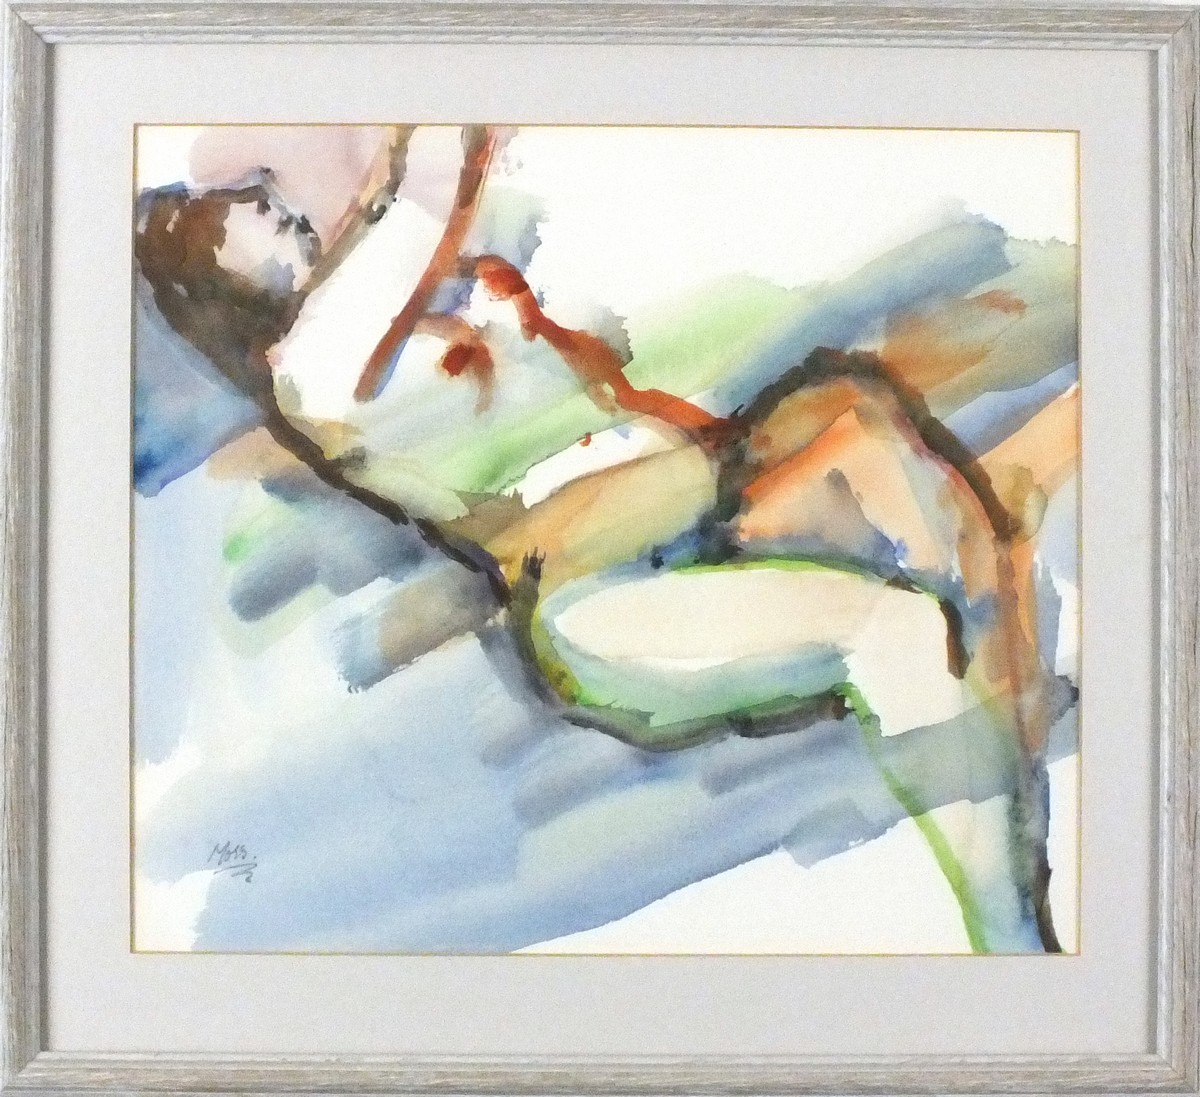 MOSS (20th Century) Reclining Nude, Watercolour, Signed lower left, 10.5" x 12.25" (27cm x 31cm) - Image 2 of 2